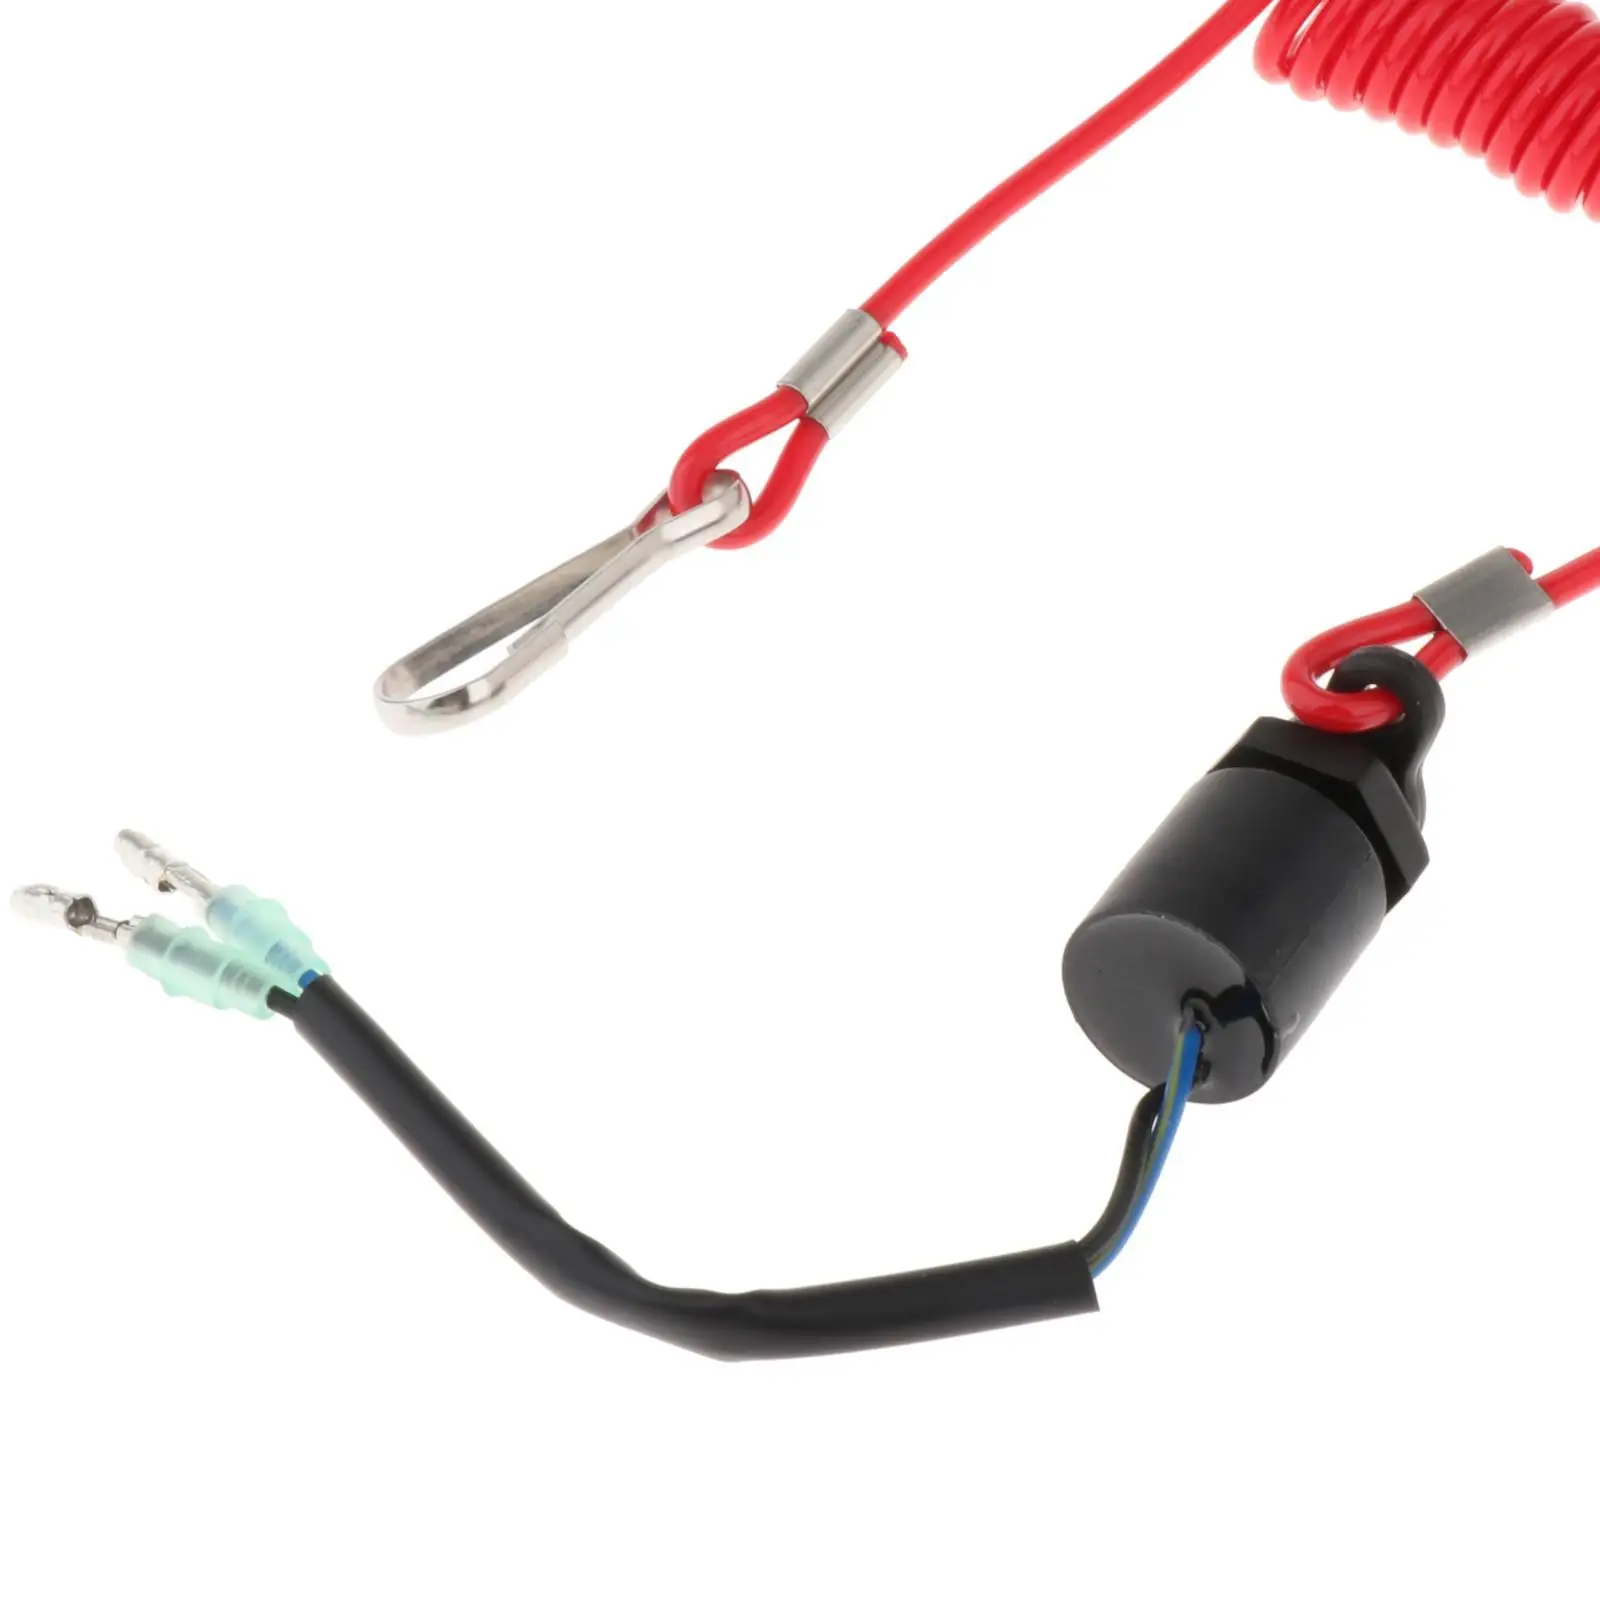 Boat Outboard Switch 37820-92E03 Safety Lanyard Cord Emergency Cut Off Cord Boat Kill Switch with Lanyard for Suzuki DT DF